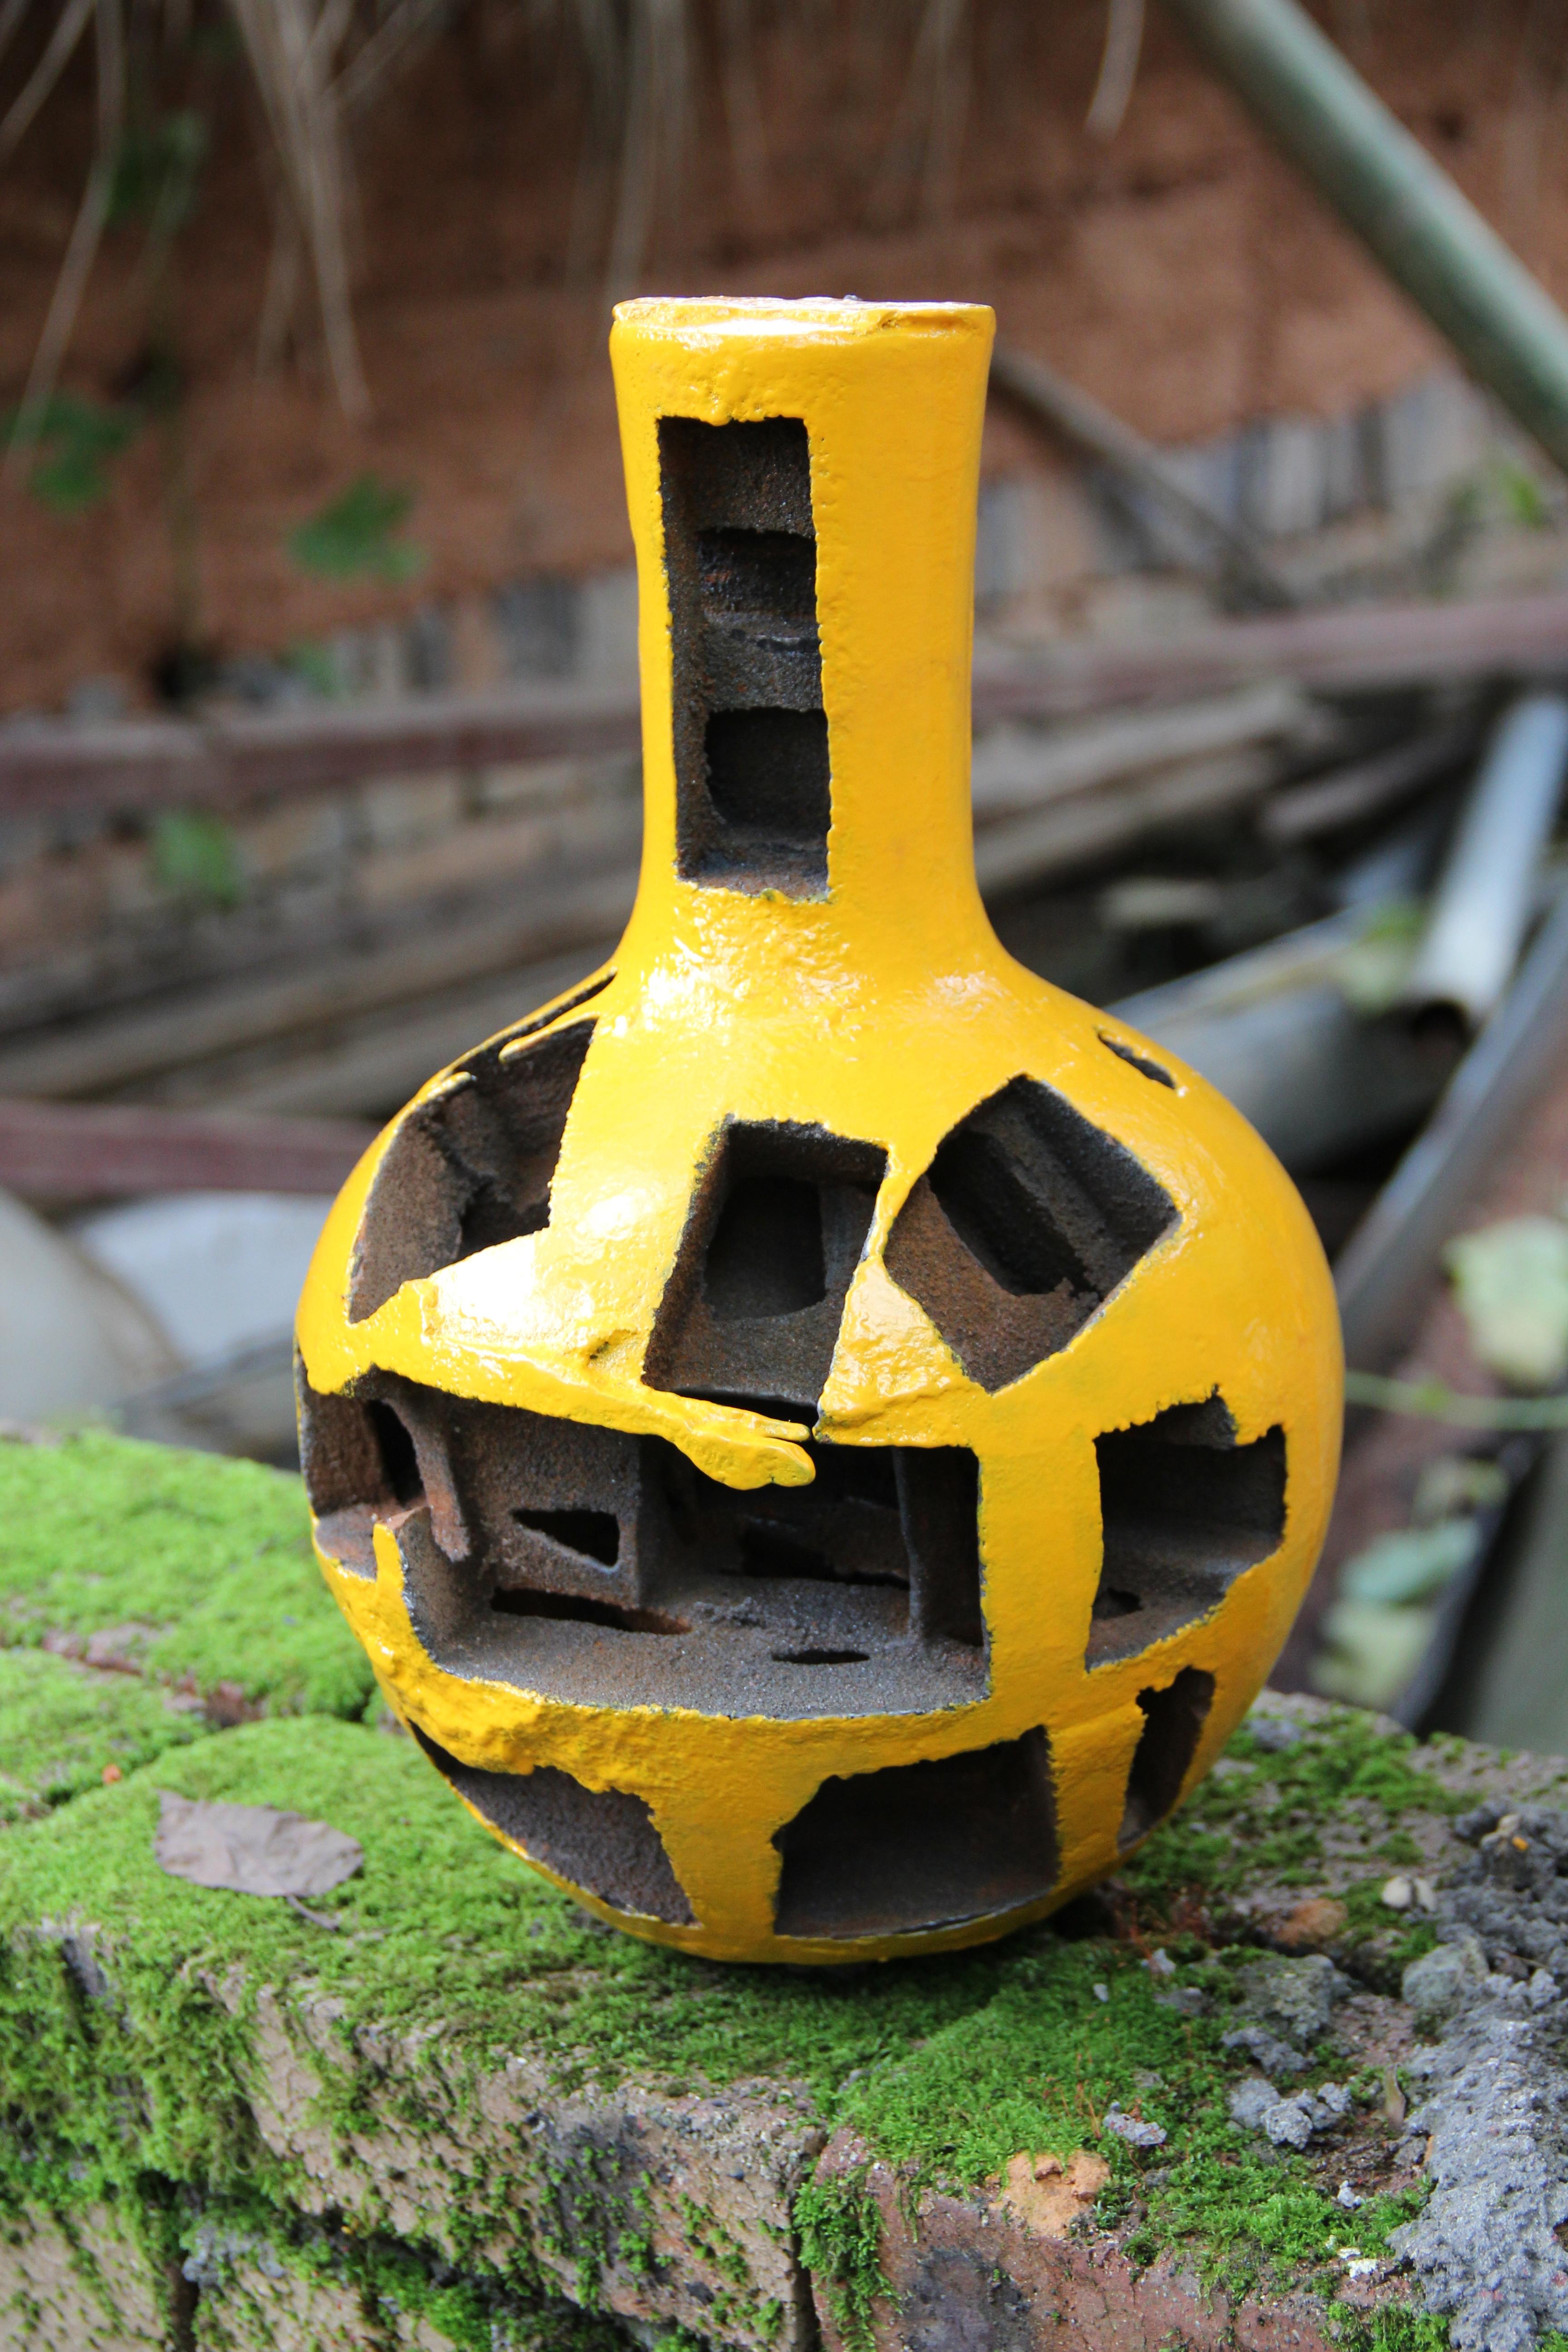 A yellow vessel with holes in it.